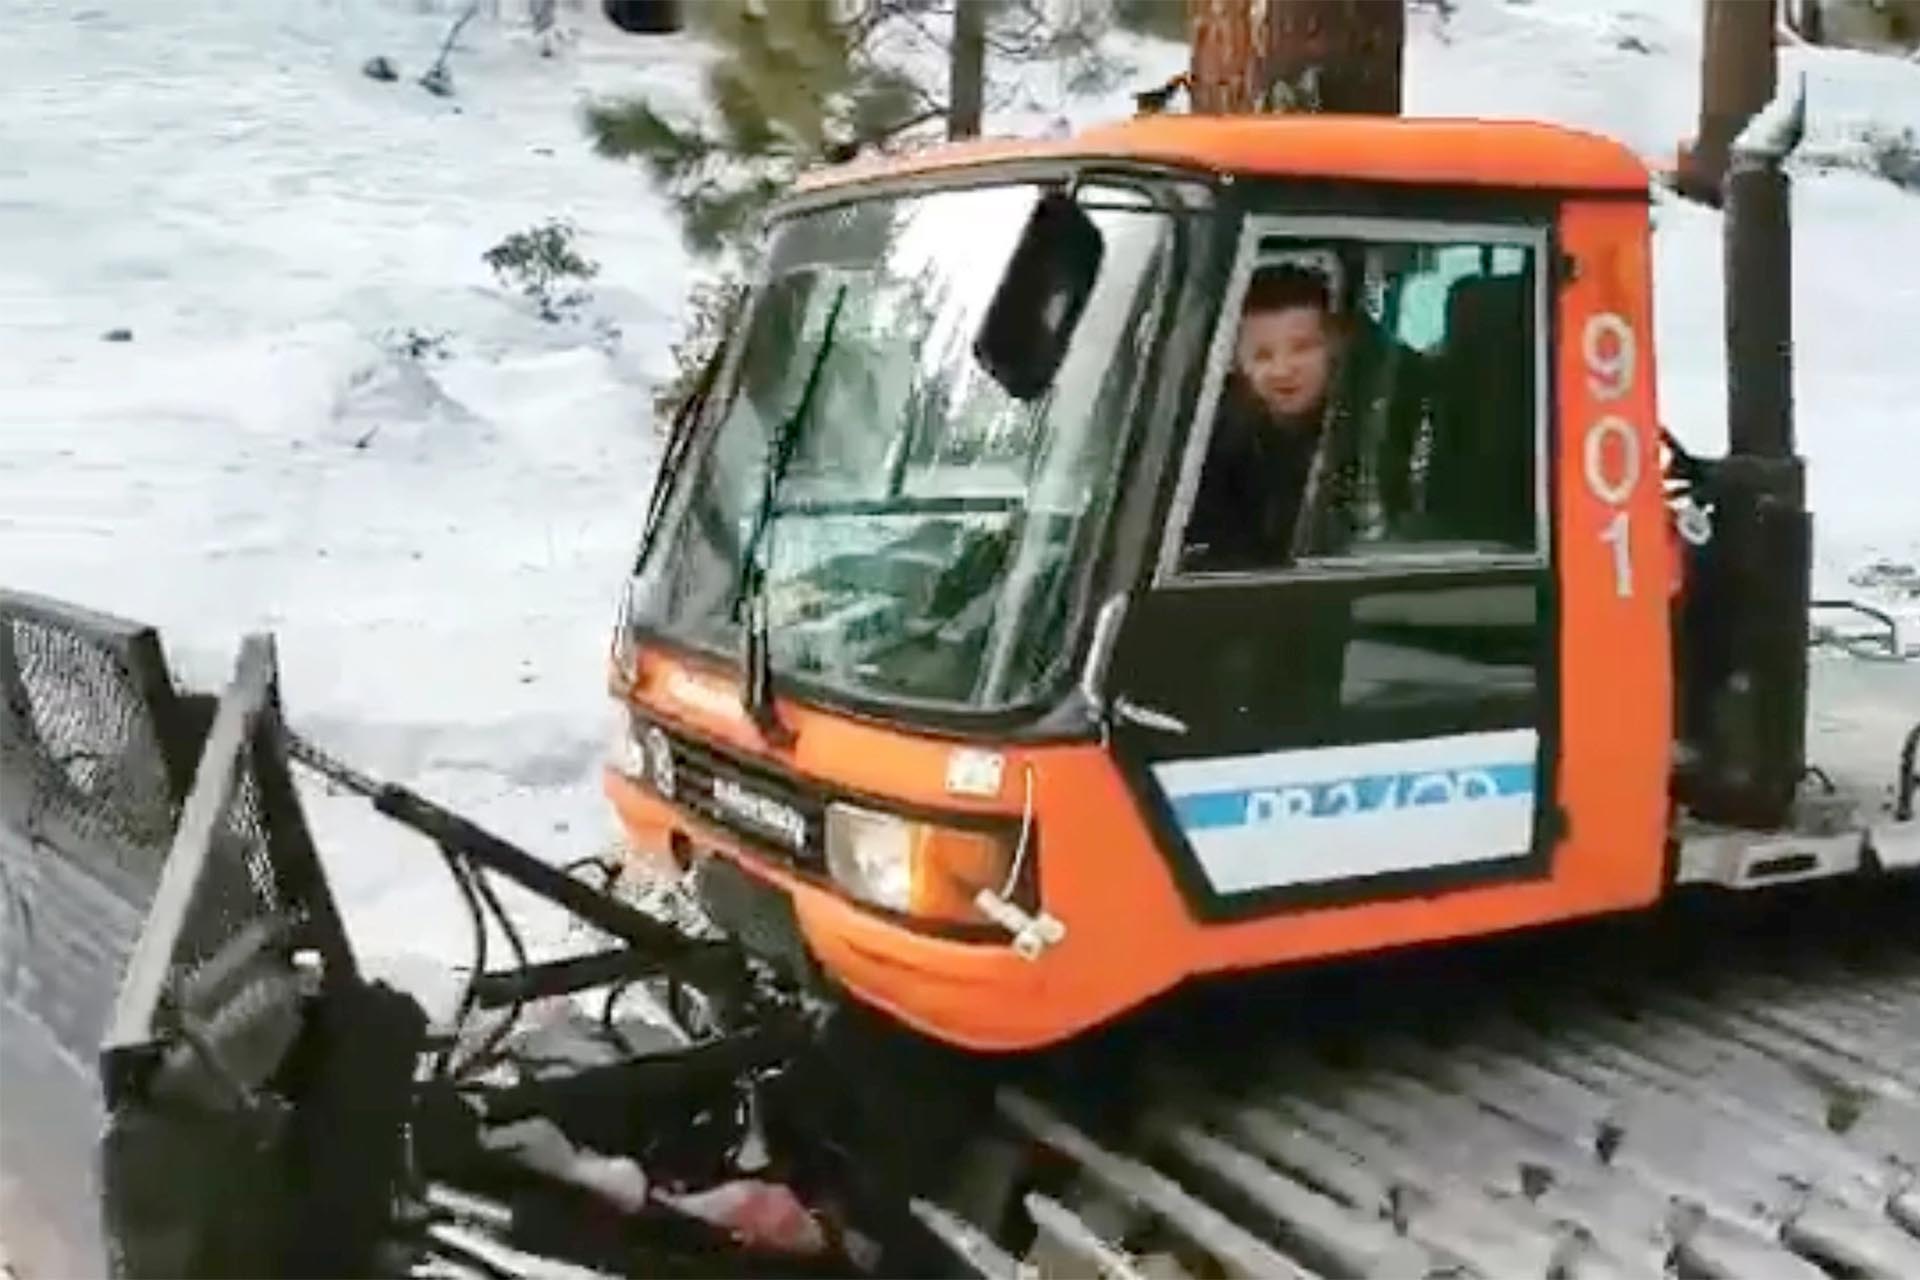 Image of the actor using a snowmobile